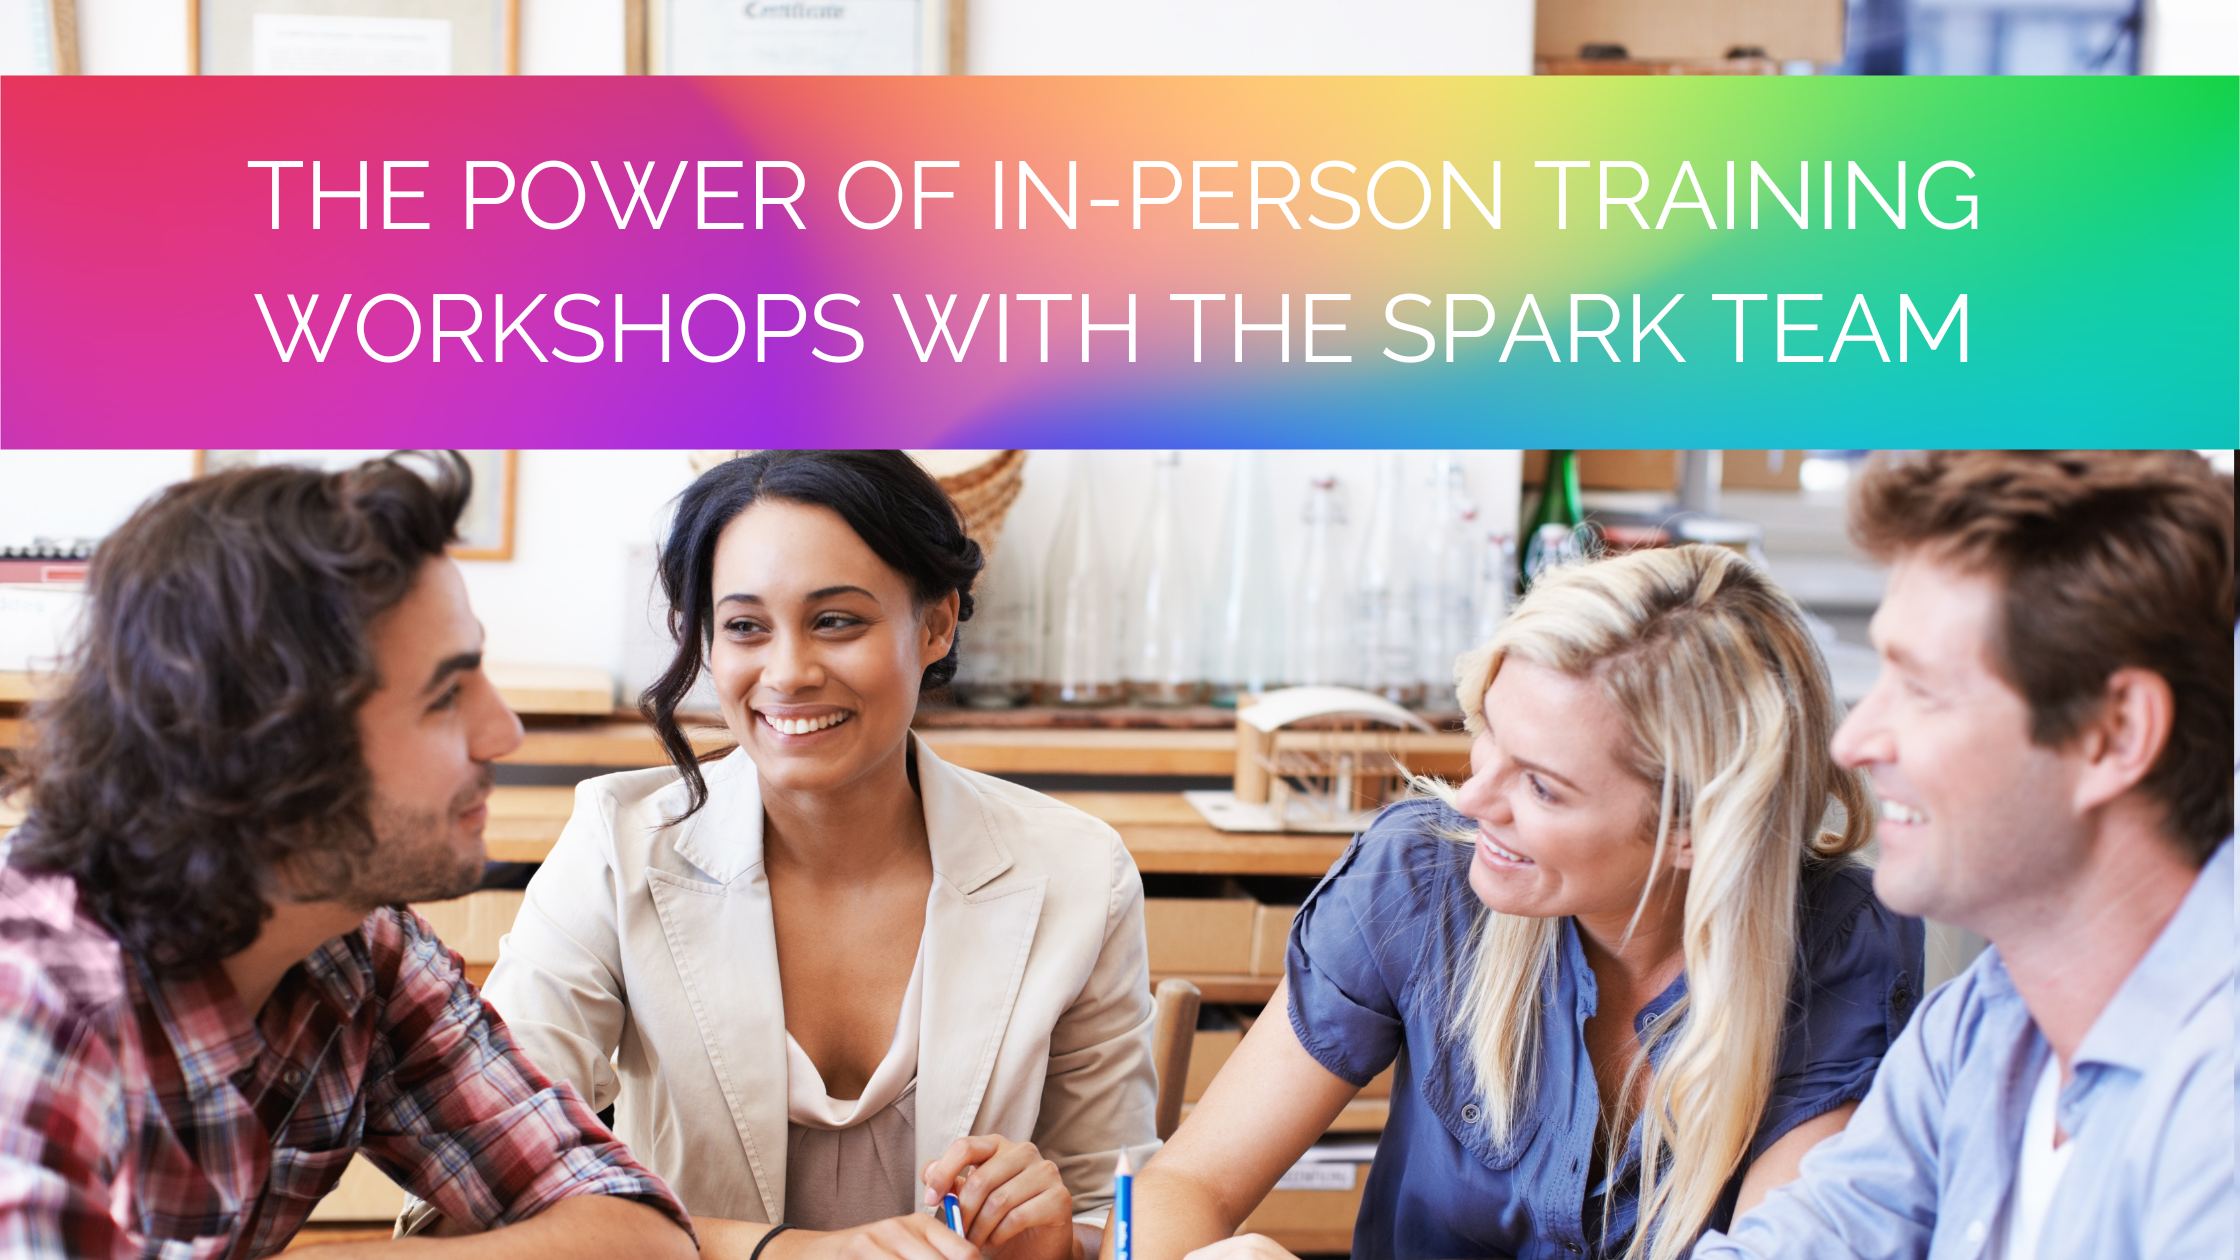 The Power of In-Person Training Workshops with the Spark Team